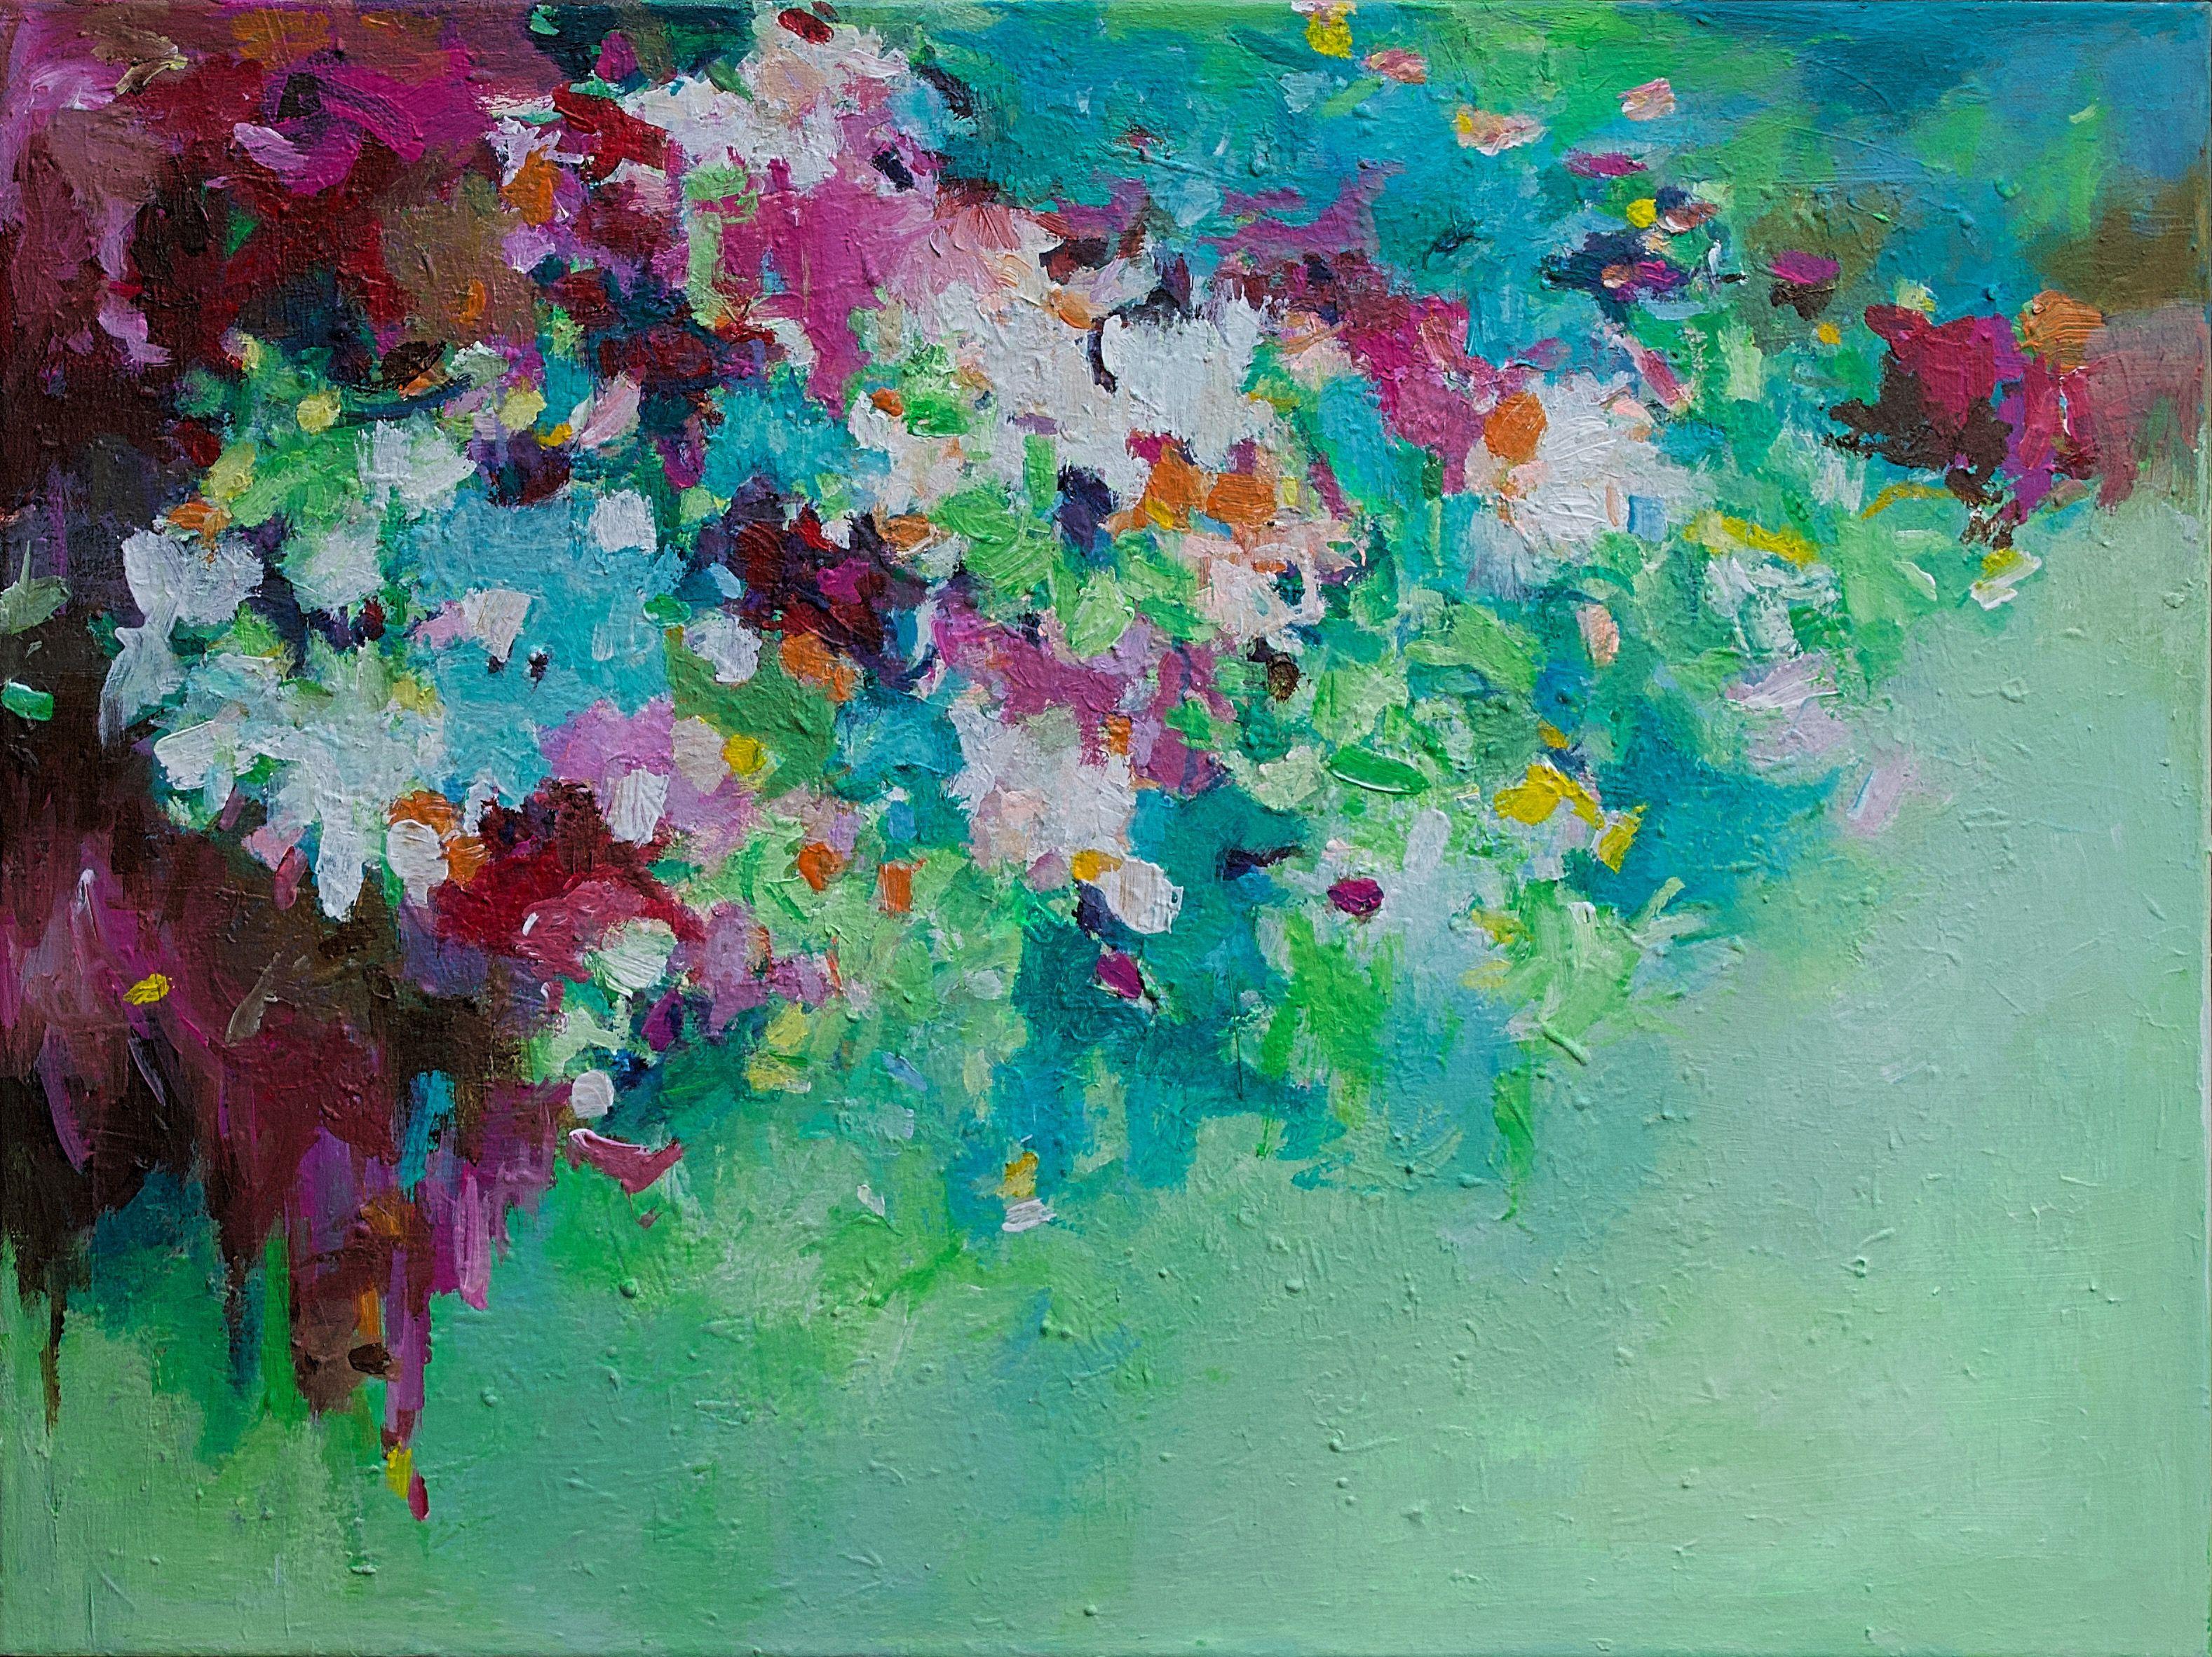 This artwork is an abstract floral horizontal painting. It has vivid bold colors, in pink and a dark red, together with white and a touch of yellow. The background is in a light blue-green, fading away to the bottom of the painting.   The painting